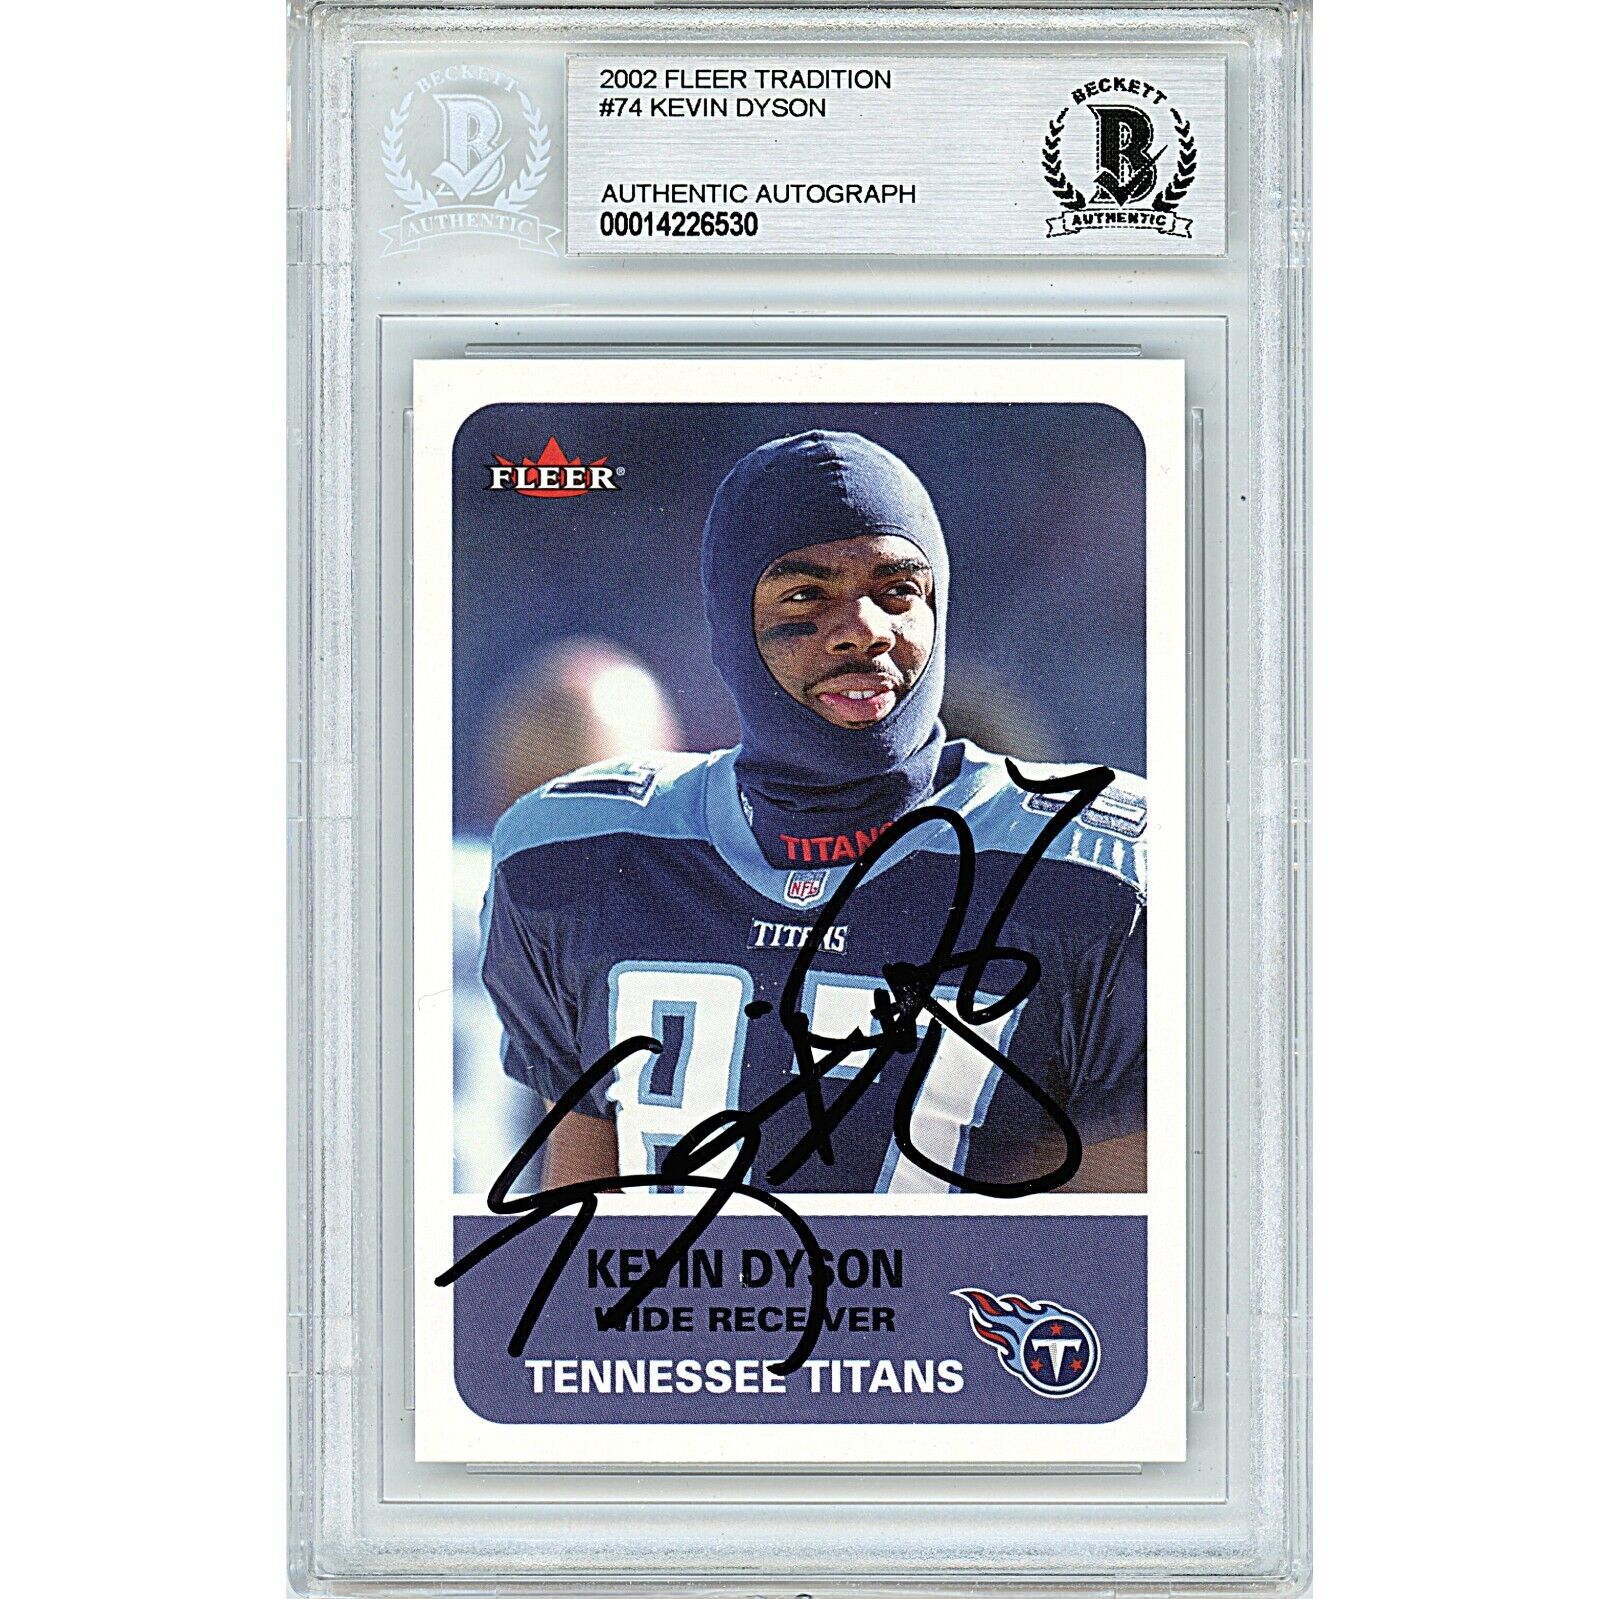 Primary image for Kevin Dyson Tennessee Titans Signed 2002 Fleer Tradition BGS On-Card Auto Slab